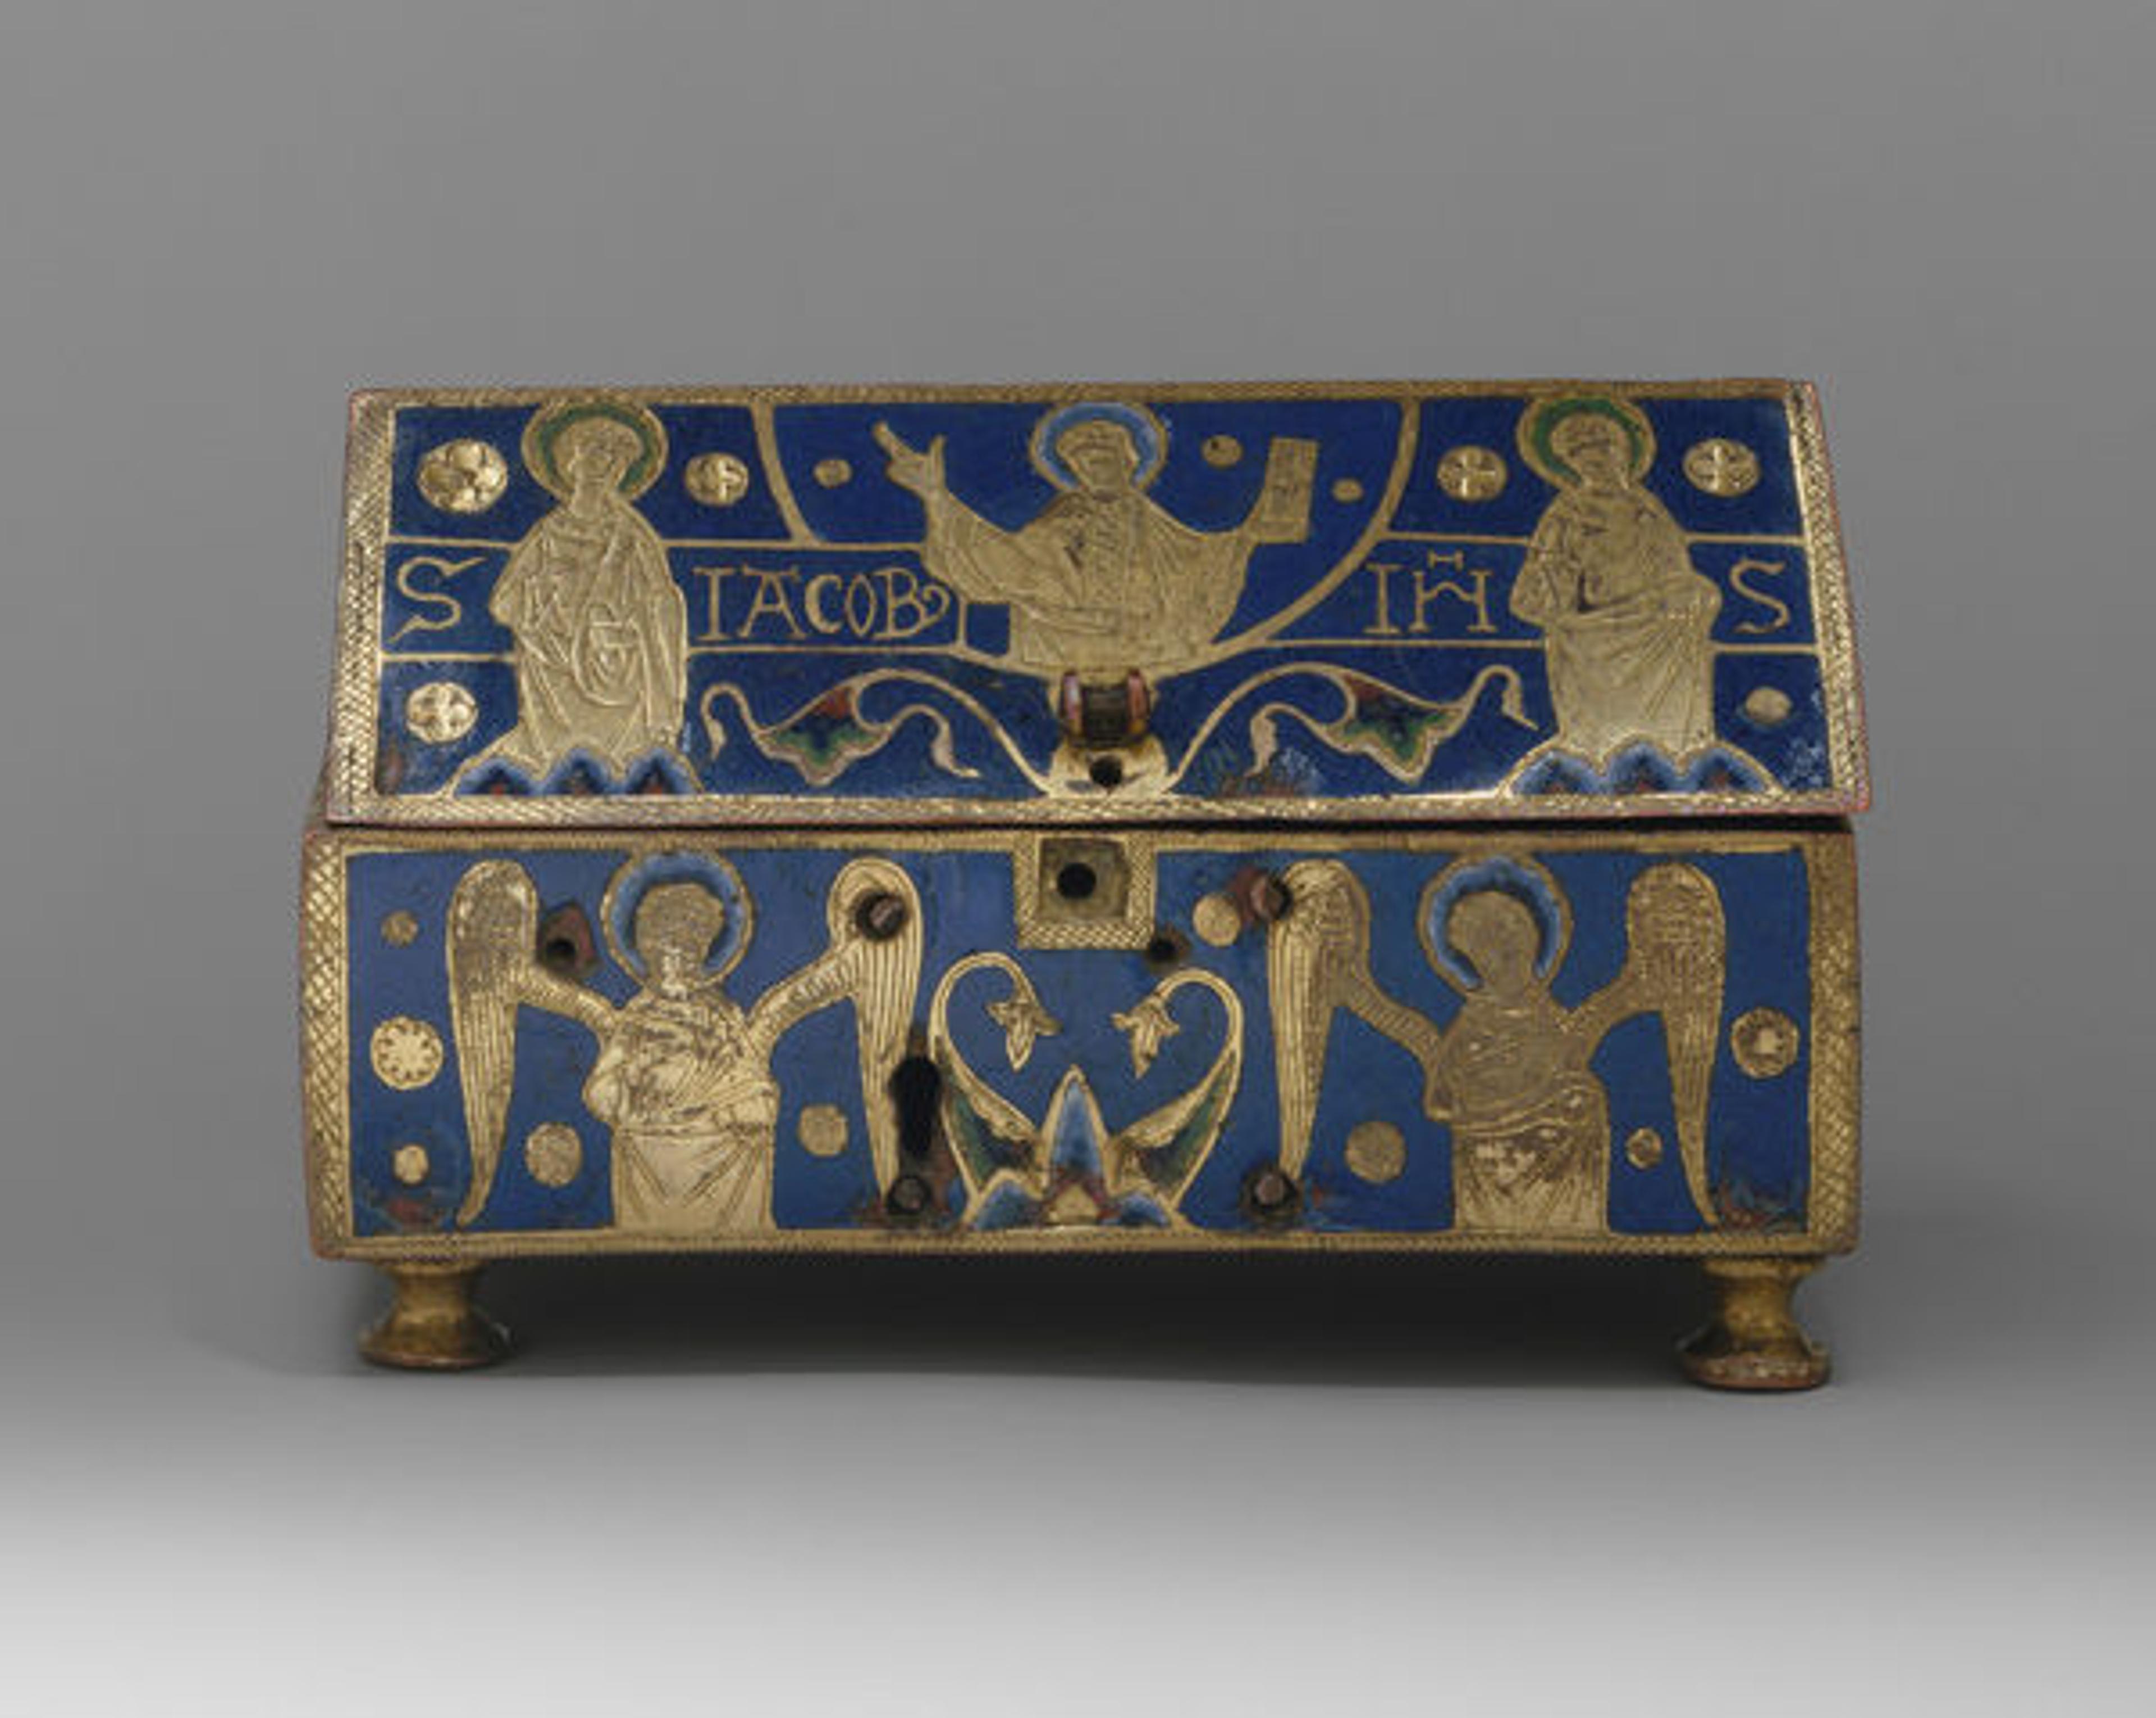 Reliquary, ca. 1200–1220. Made in Limoges, France. French. Copper: engraved, scraped, stippled, and gilt; champlevé enamel: blue-black, two medium blues and one light blue, turquoise, light green, yellow, red and white; overall: 4 1/2 x 2 1/4 x 2 7/8in. (11.4 x 5.7 x 7.3cm). The Metropolitan Museum of Art, New York, Bequest of Benjamin Altman, 1913 (14.40.703)